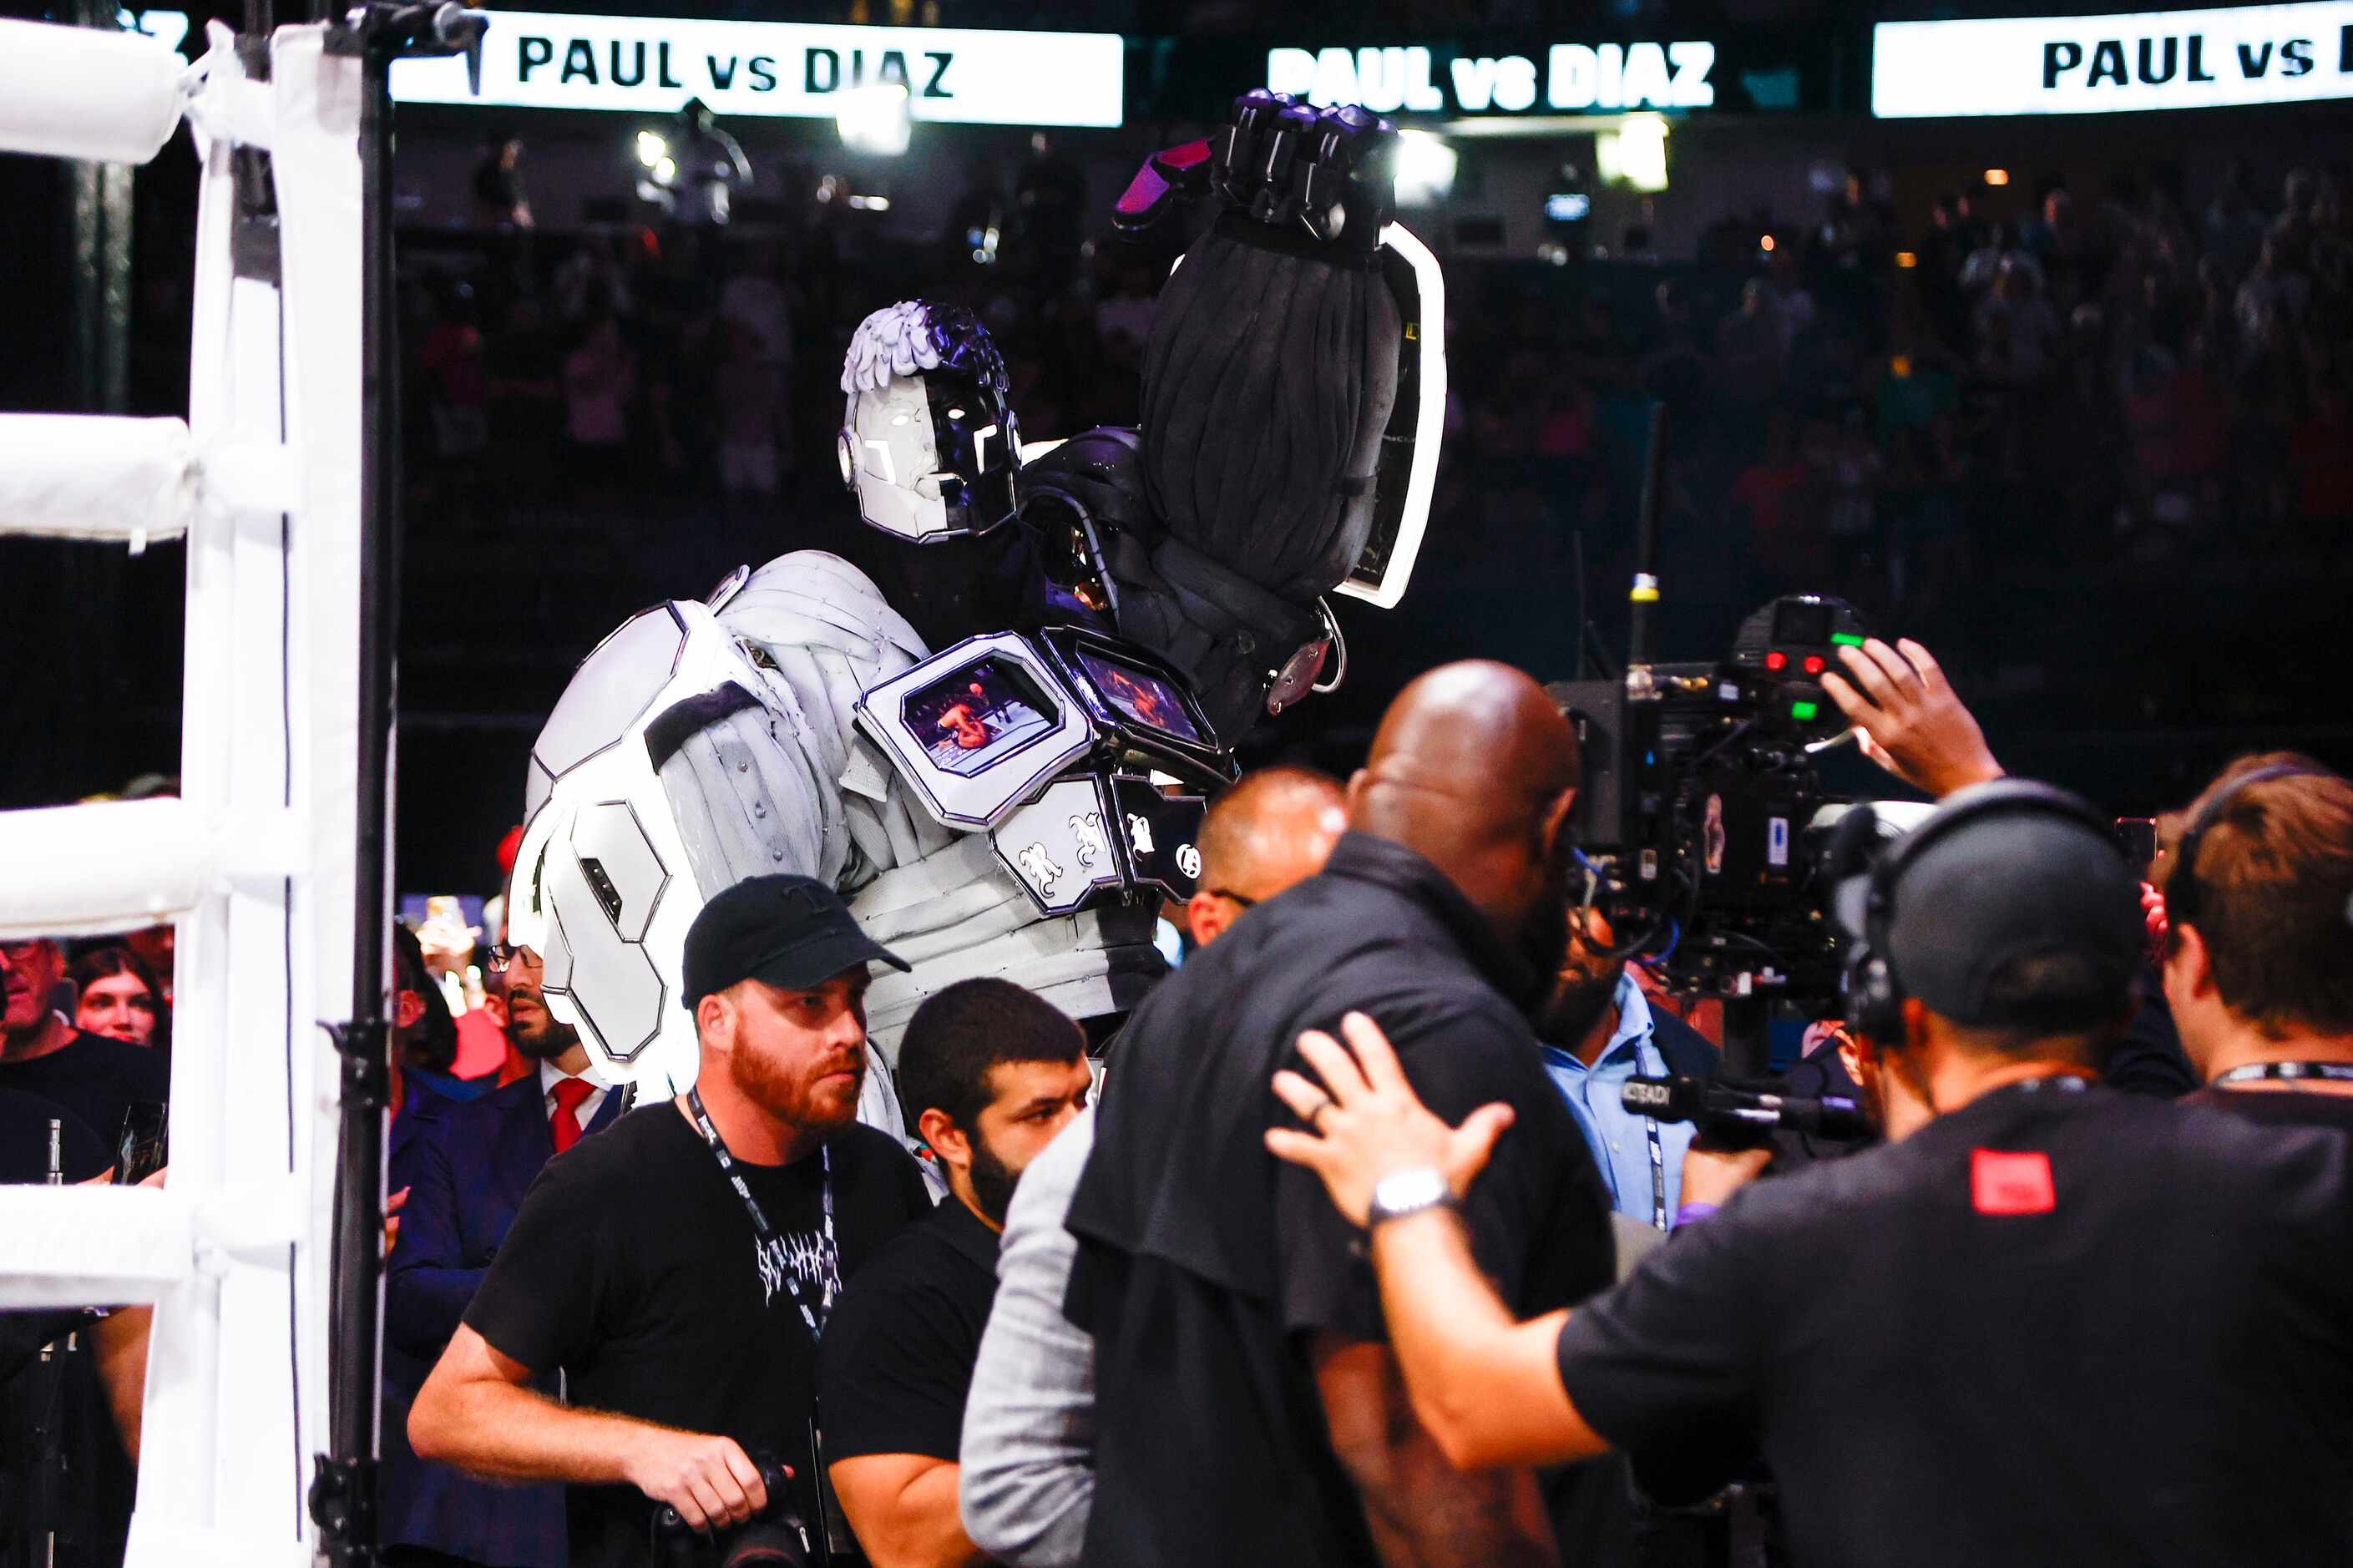 A large robot in the likeness of Jake Paul escorts the real Jake Paul, not pictured, to the...